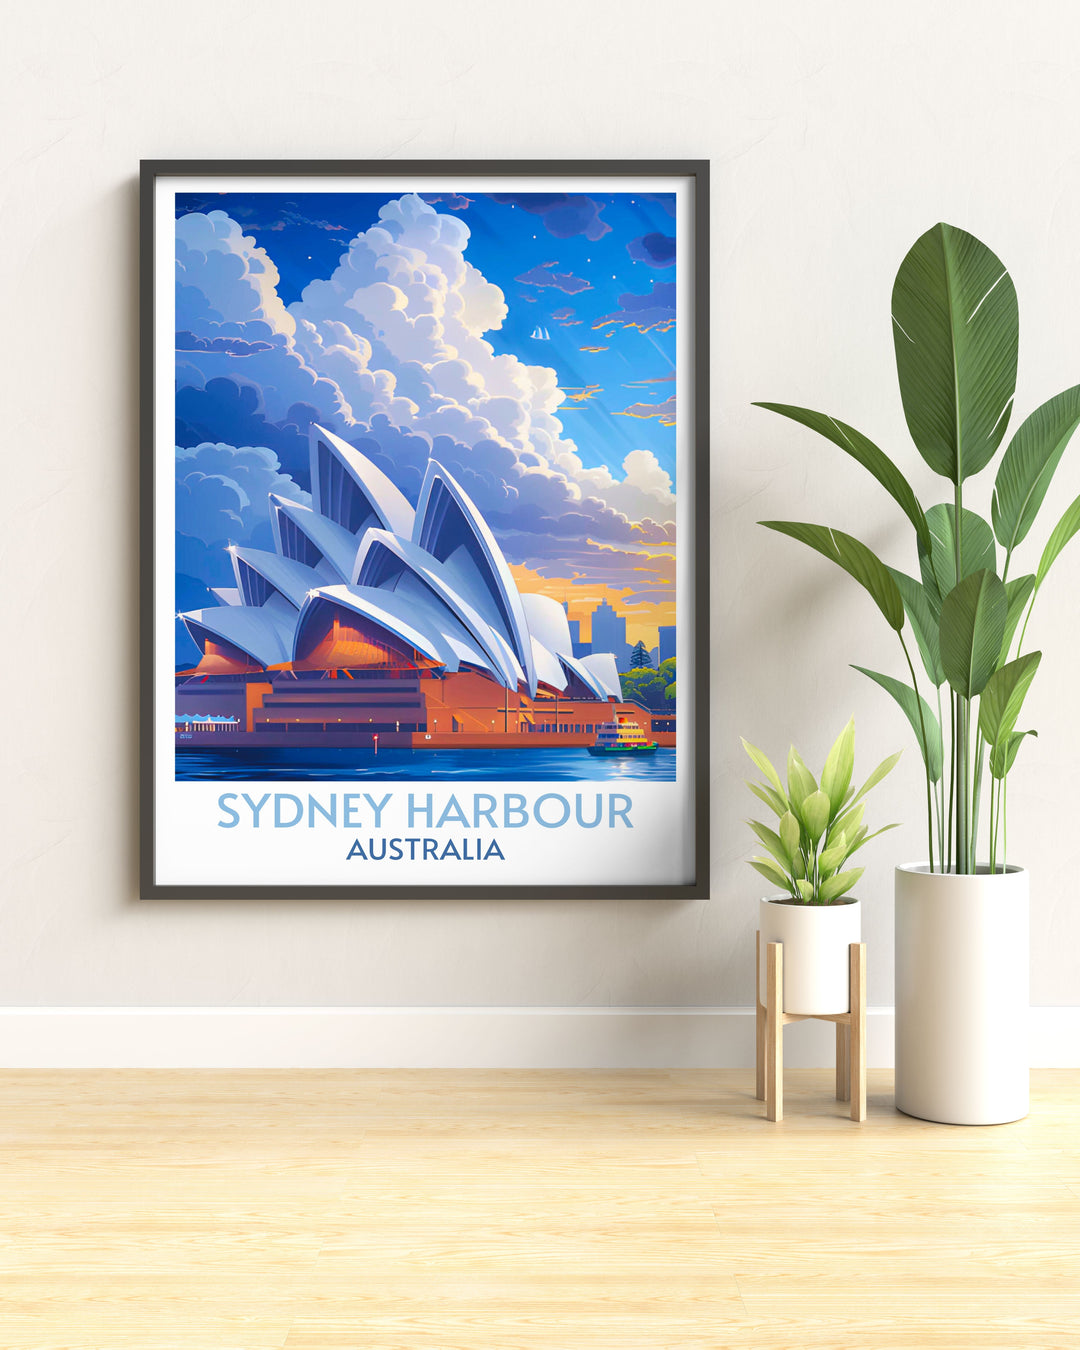 Vibrant illustration of Bondi Beach in a print capturing the sun soaked shores, crashing waves, and lively beachfront, bringing the energy and beauty of this famous Sydney destination into your home decor.